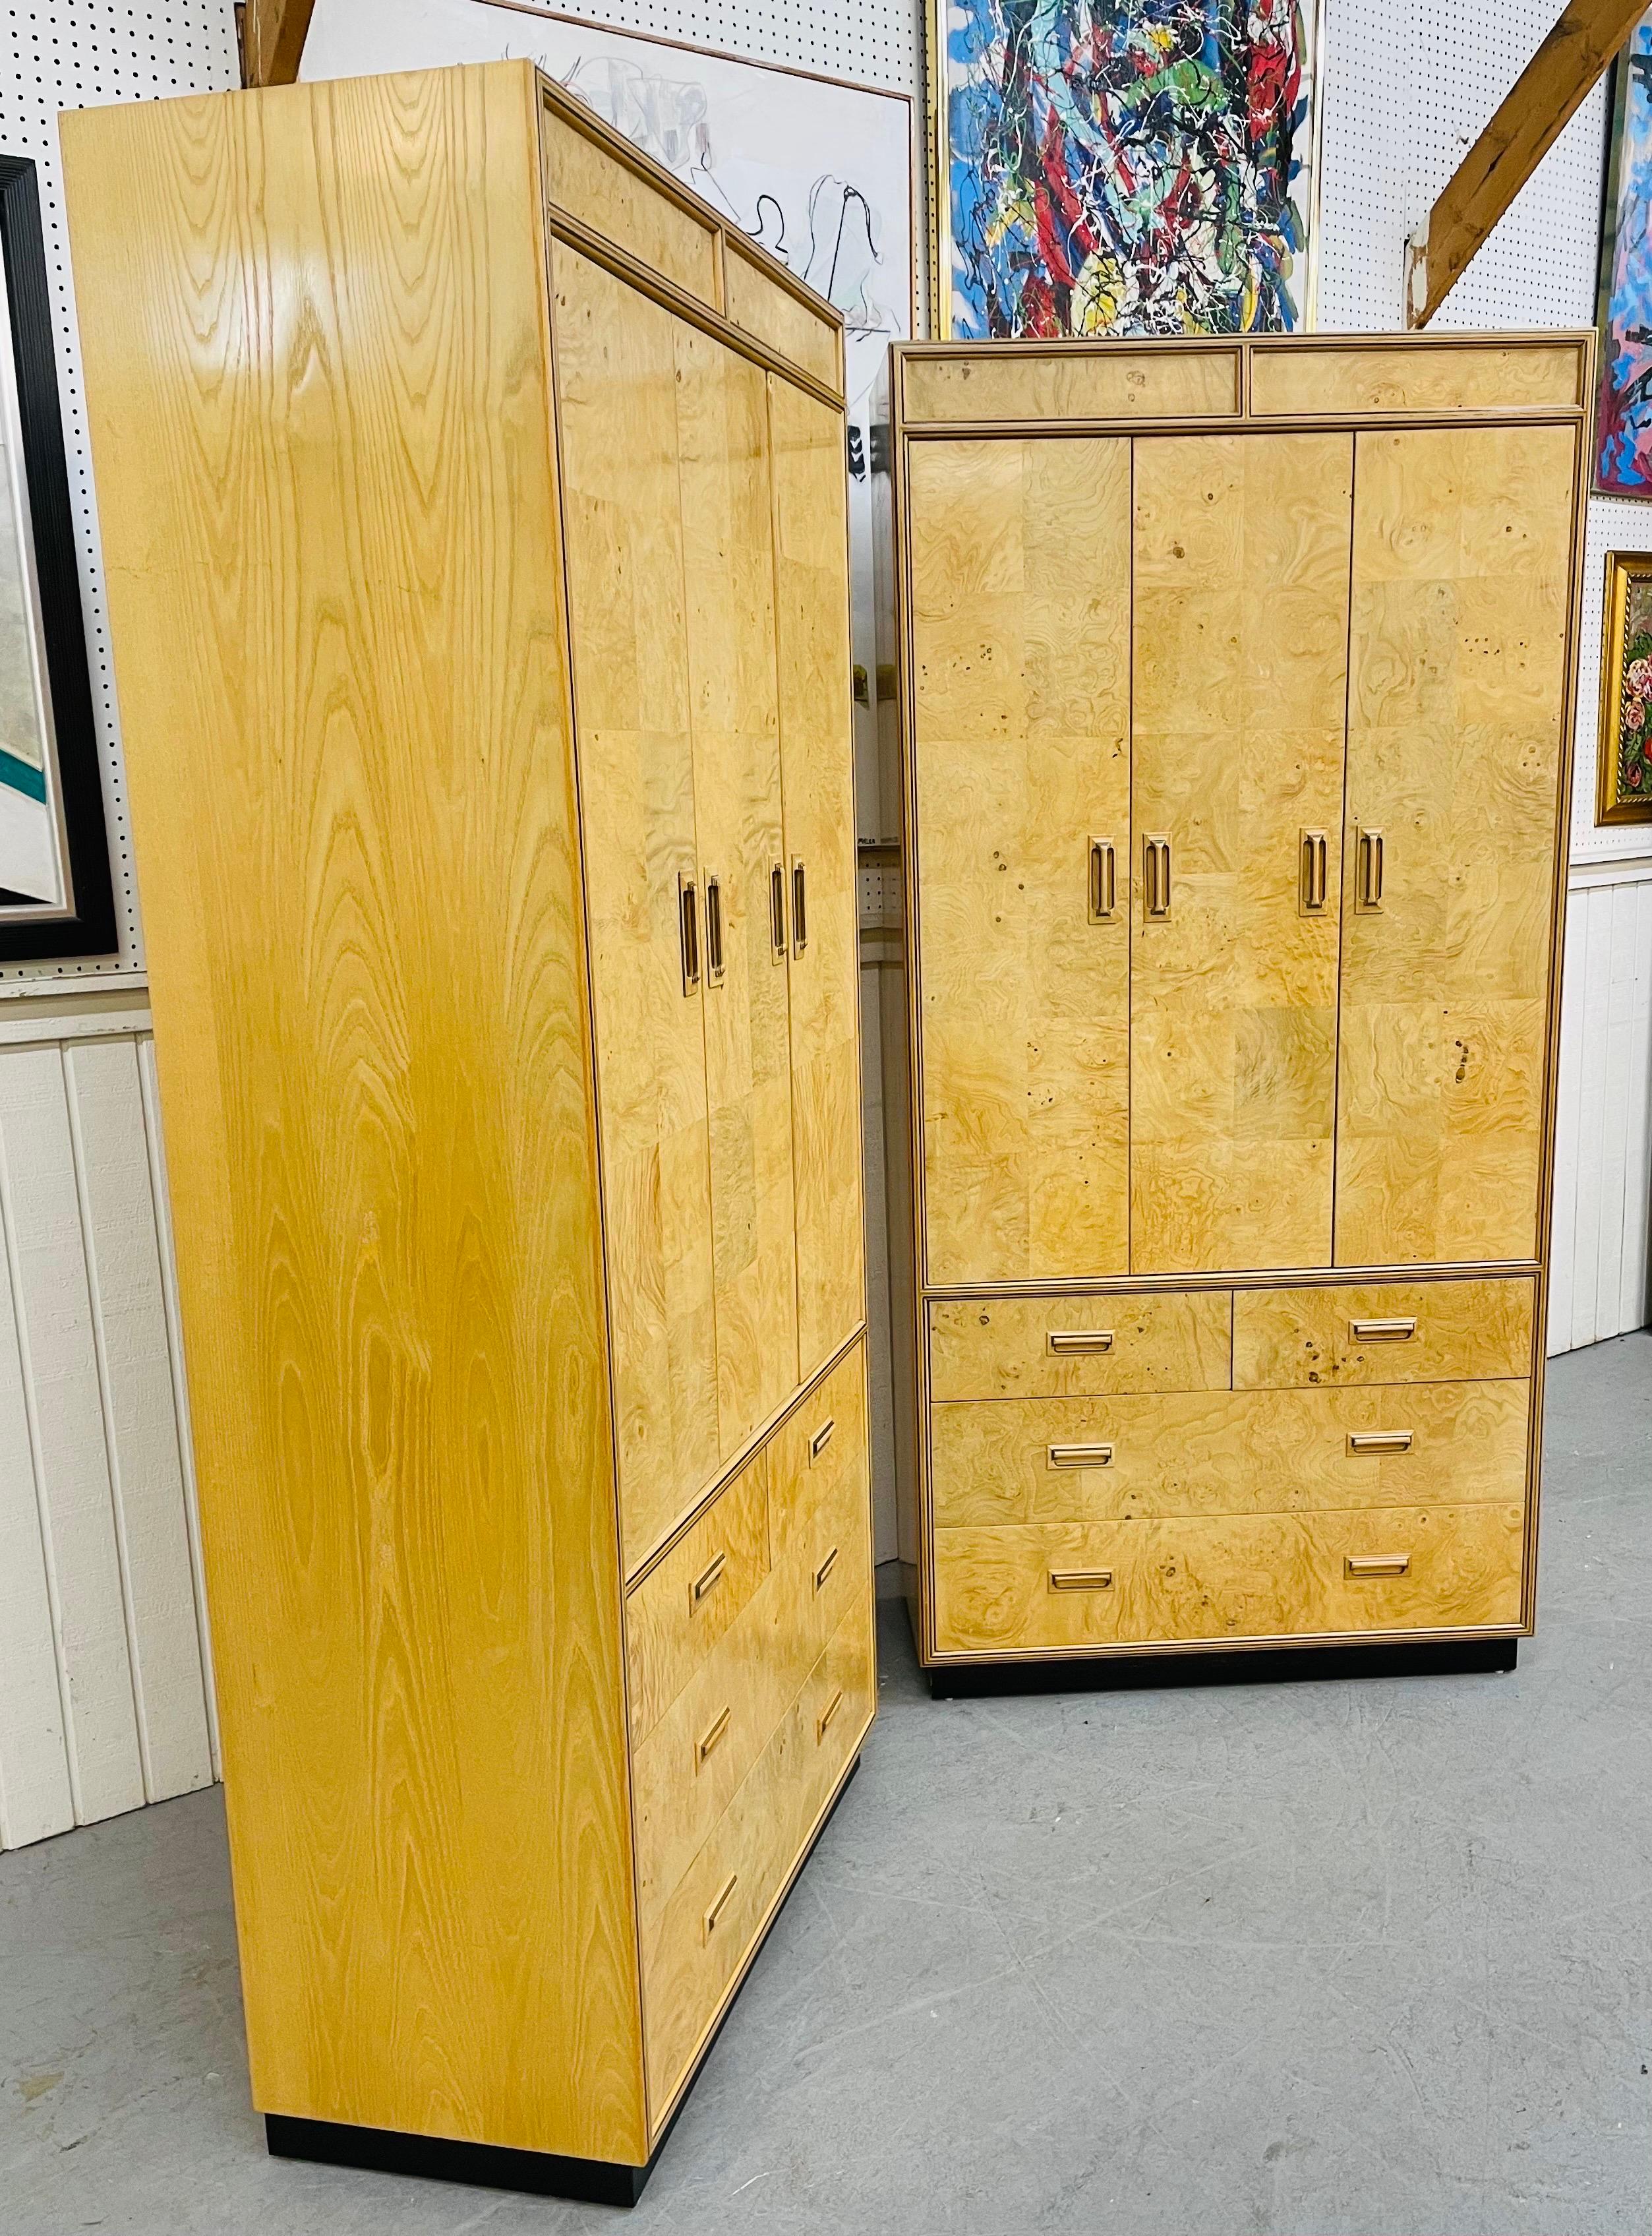 This listing is for a pair of vintage Henredon scene two burled wood armoires. Featuring double doors that open up to three storage shelves, top shelf dividers, three large drawers at the bottom, recessed wood pulls, a black plinth base, and a